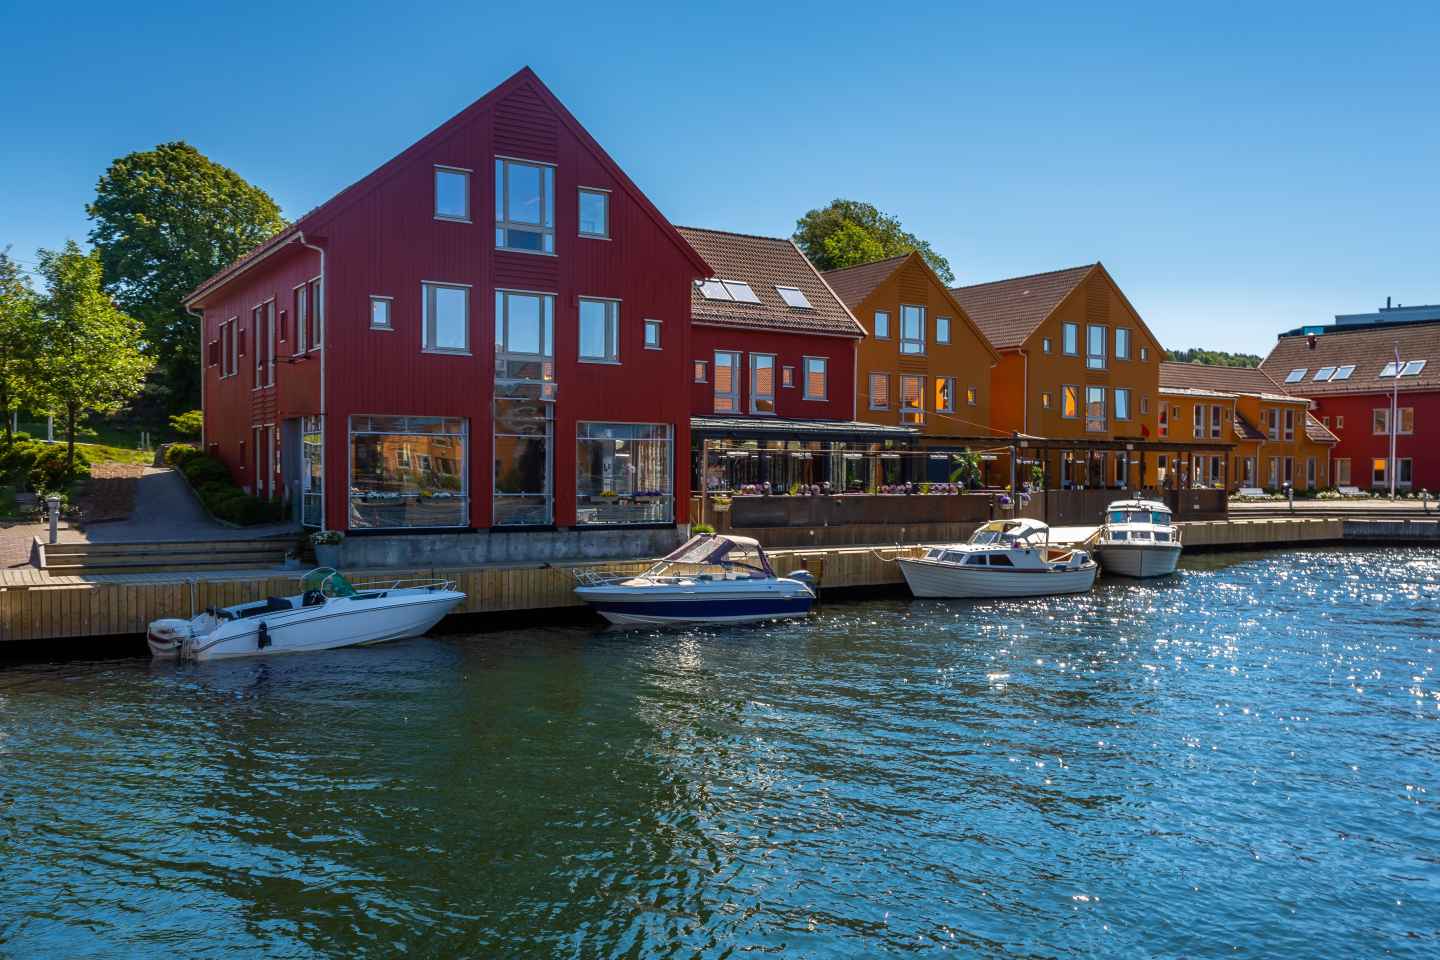 Kristiansand: Guided Cultural Walking Tour